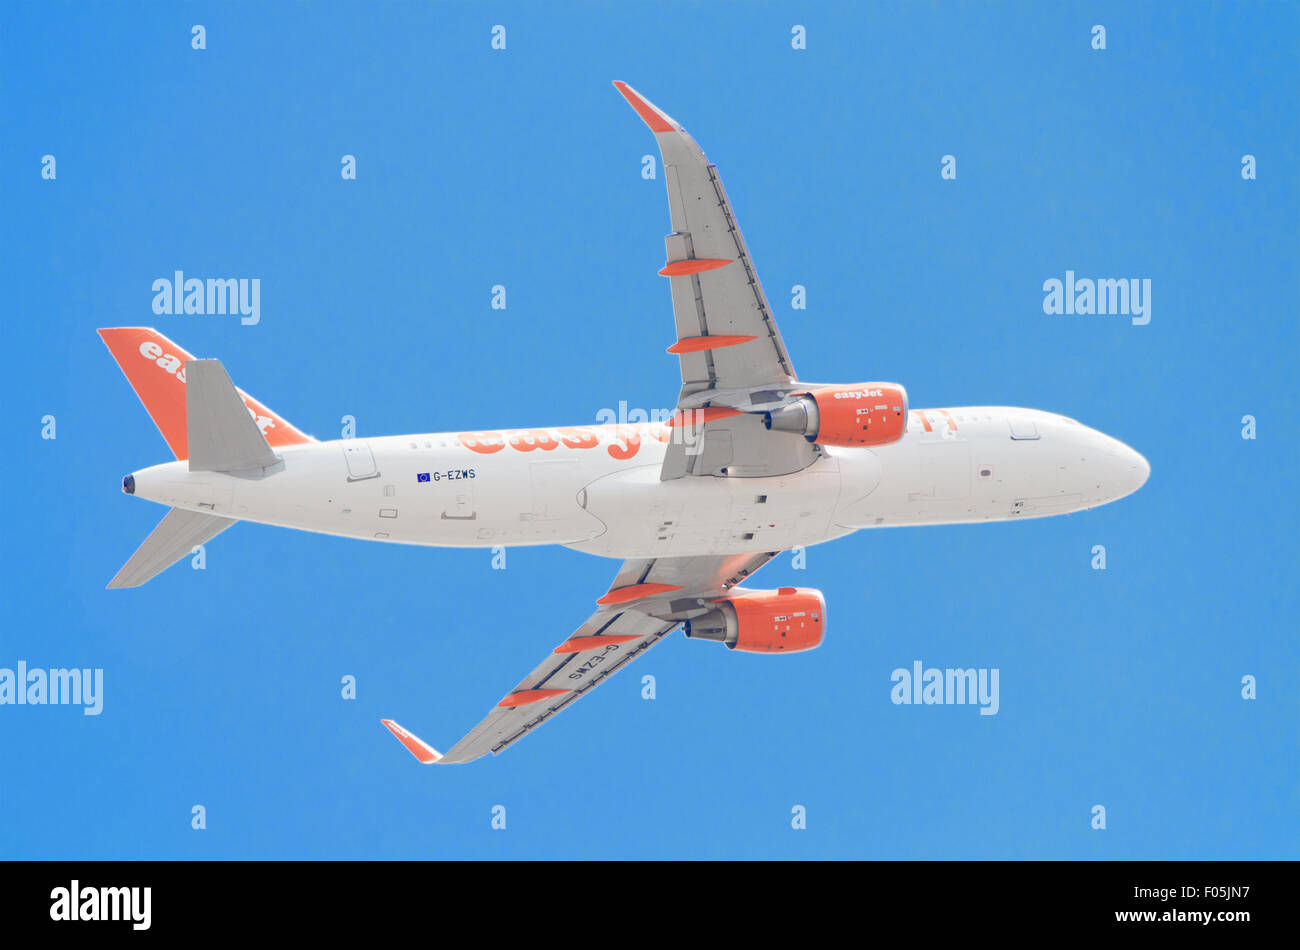 TENERIFE, SPAIN - JUNE 3: Scenic view of an Easy Jet Airbus A320-200 taking off from Tenerife south airport on a sunny day. Stock Photo